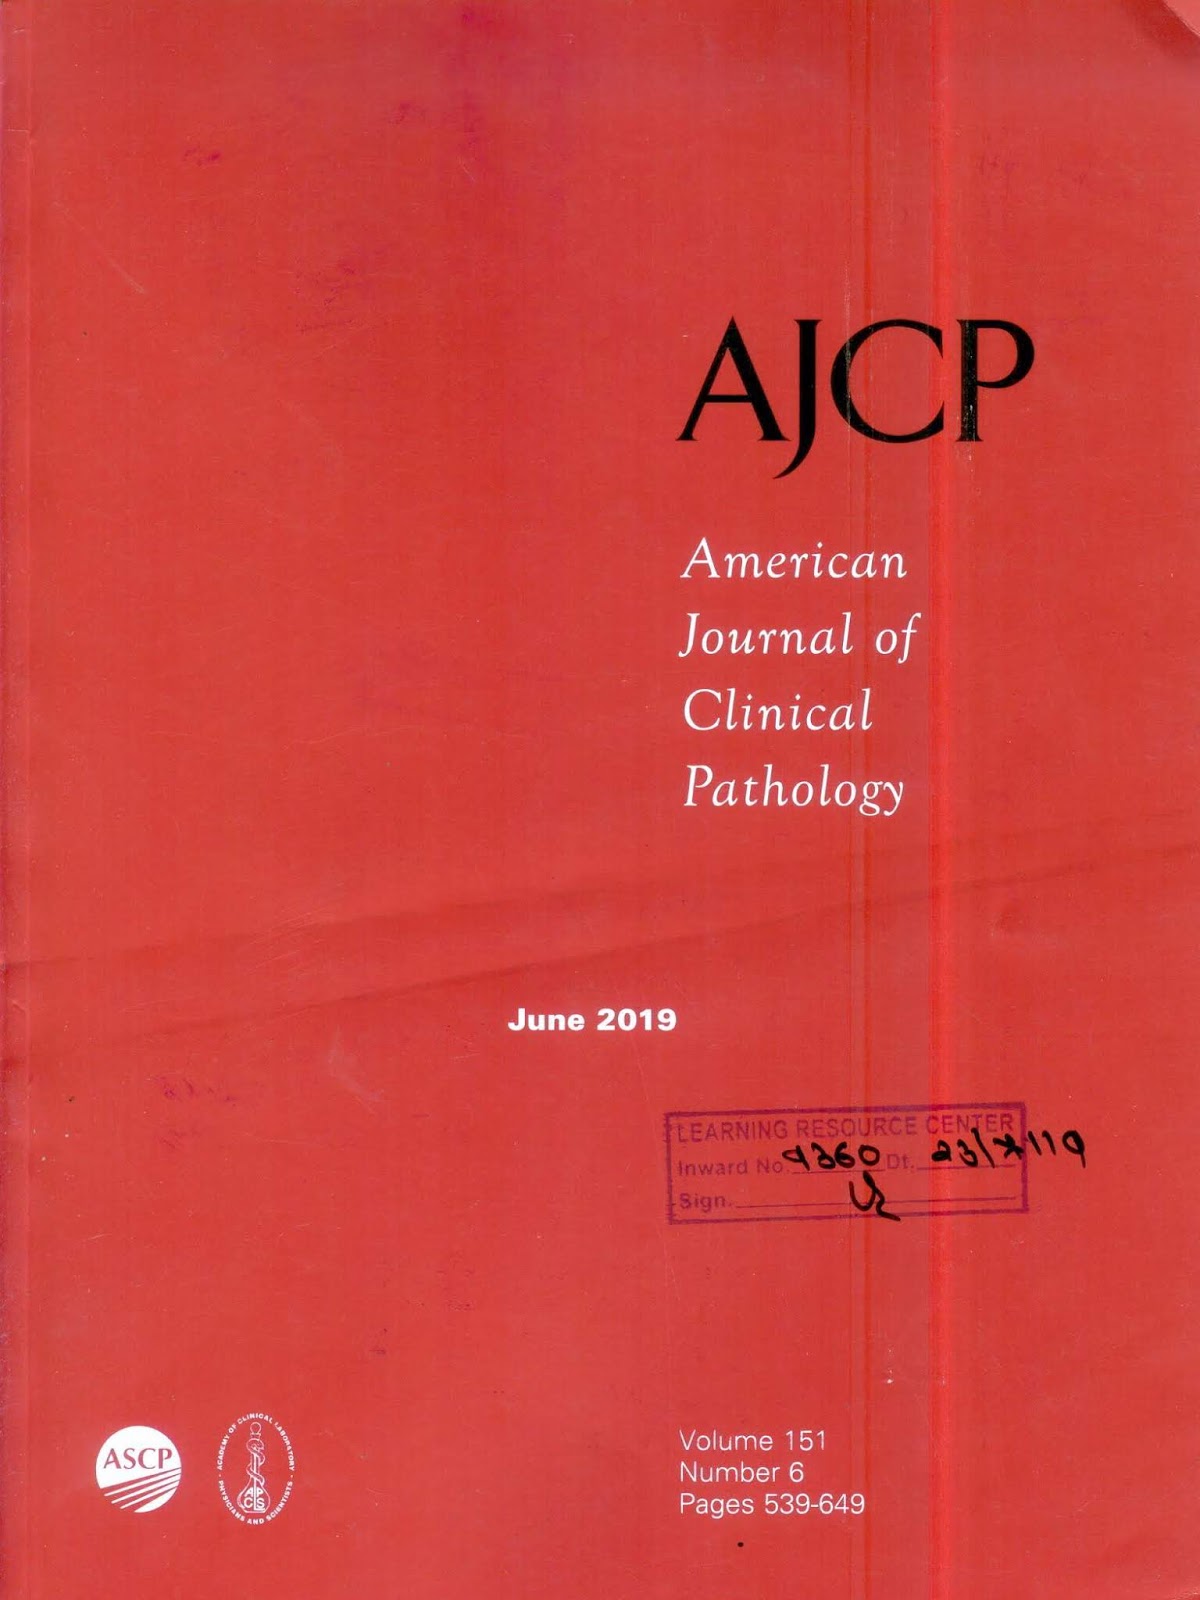 https://academic.oup.com/ajcp/issue/151/6